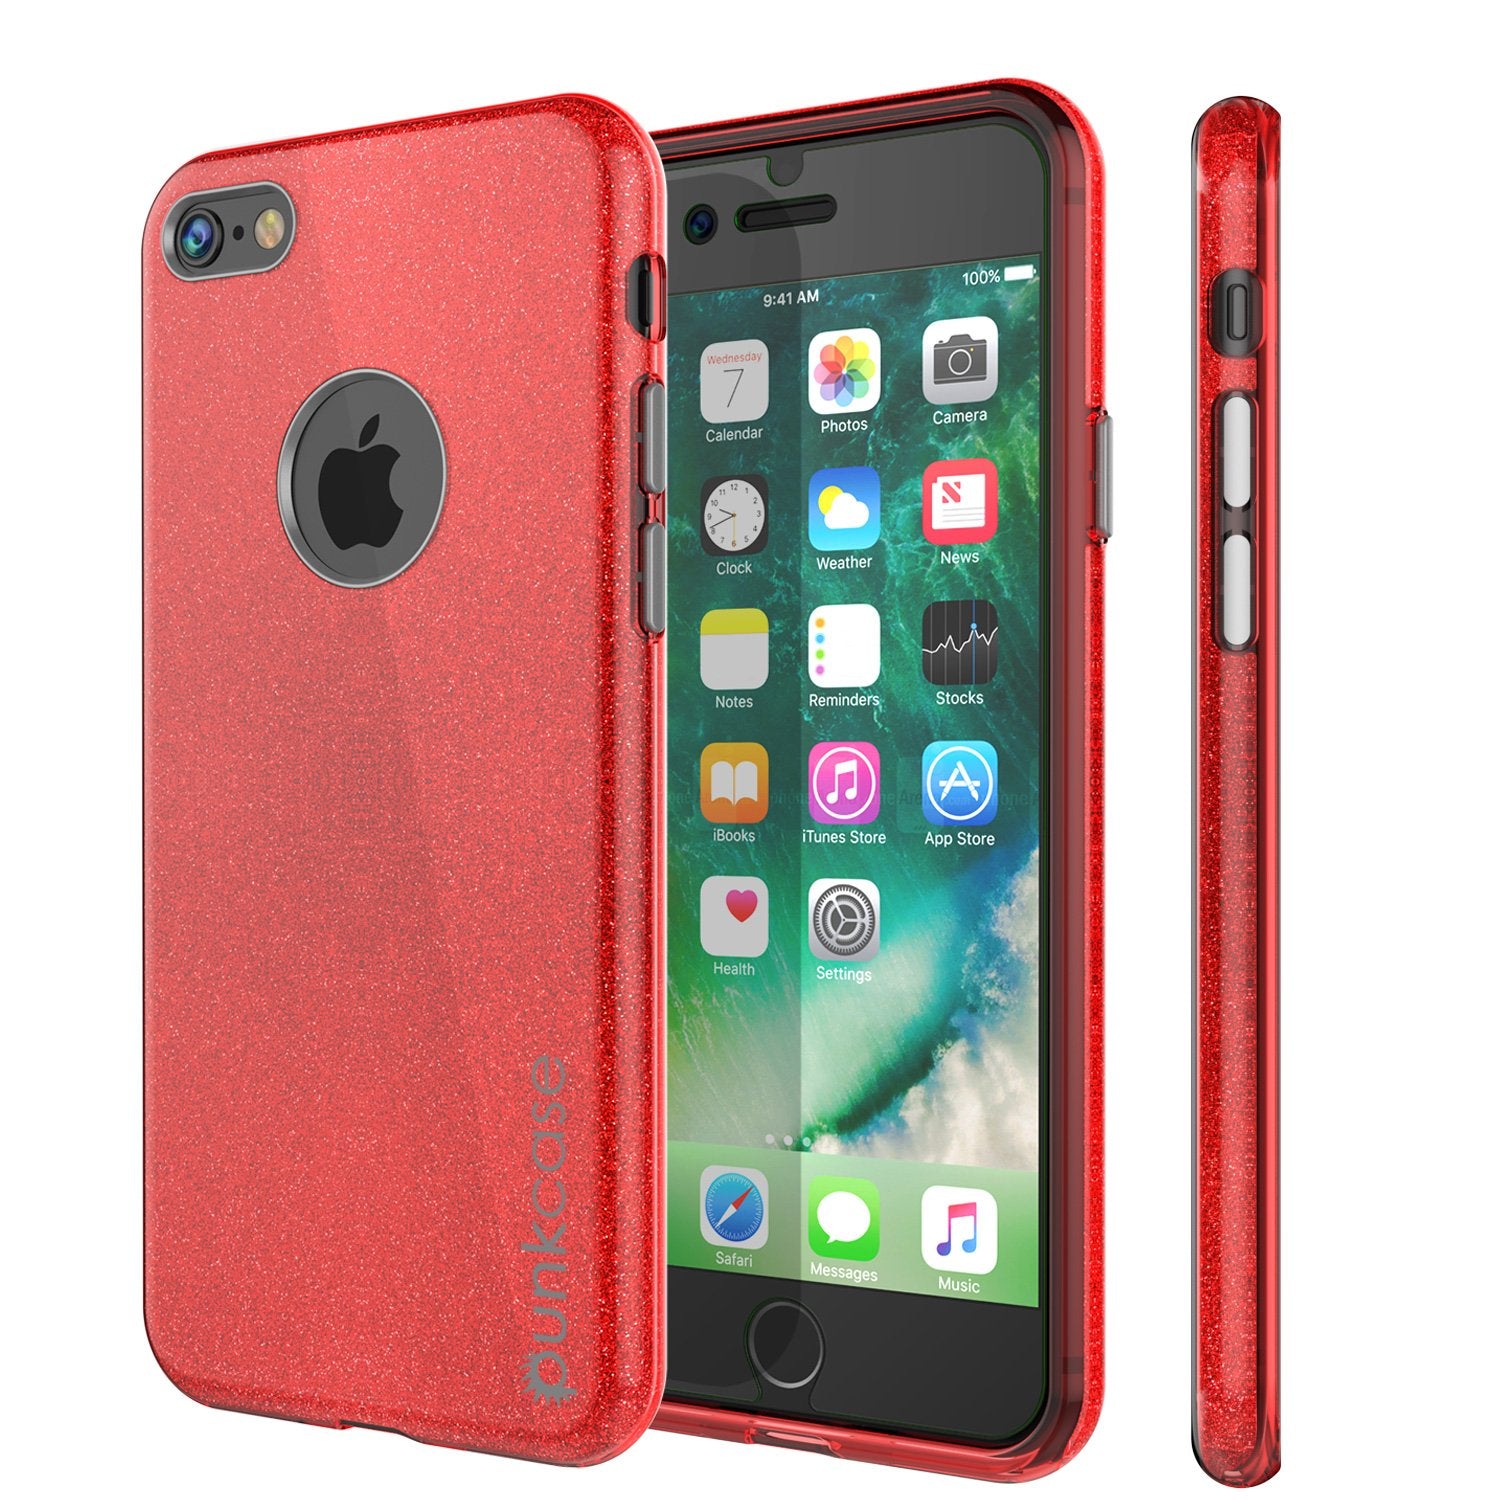 iPhone 8 Case, Punkcase Galactic 2.0 Series Ultra Slim Protective Armor TPU Cover [Red]